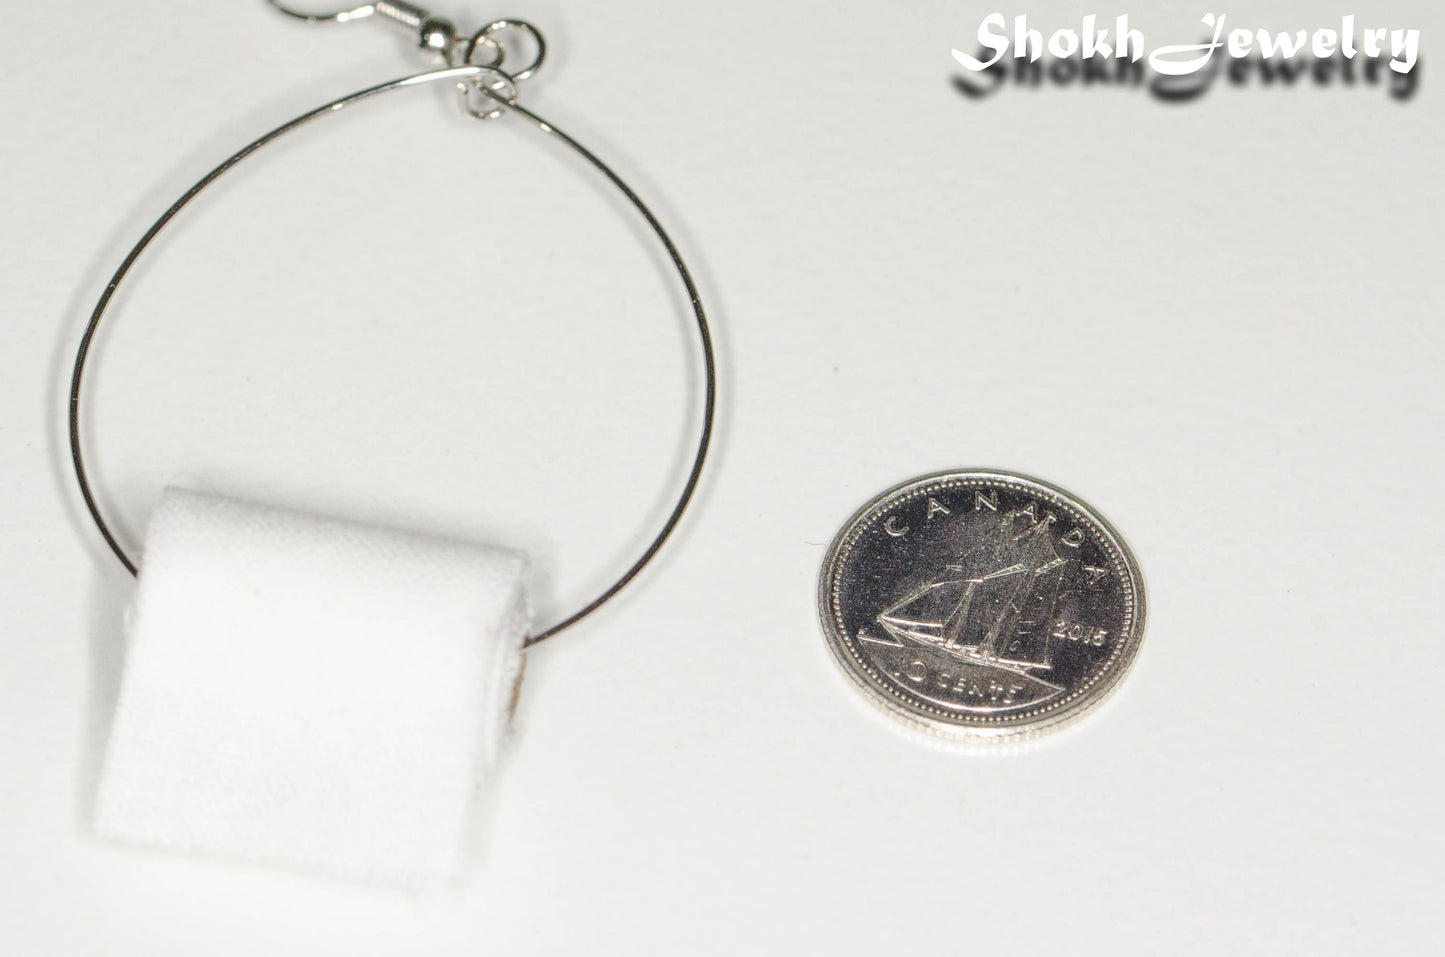 Close up of Large Miniature Toilet Paper Roll Earring beside a dime.